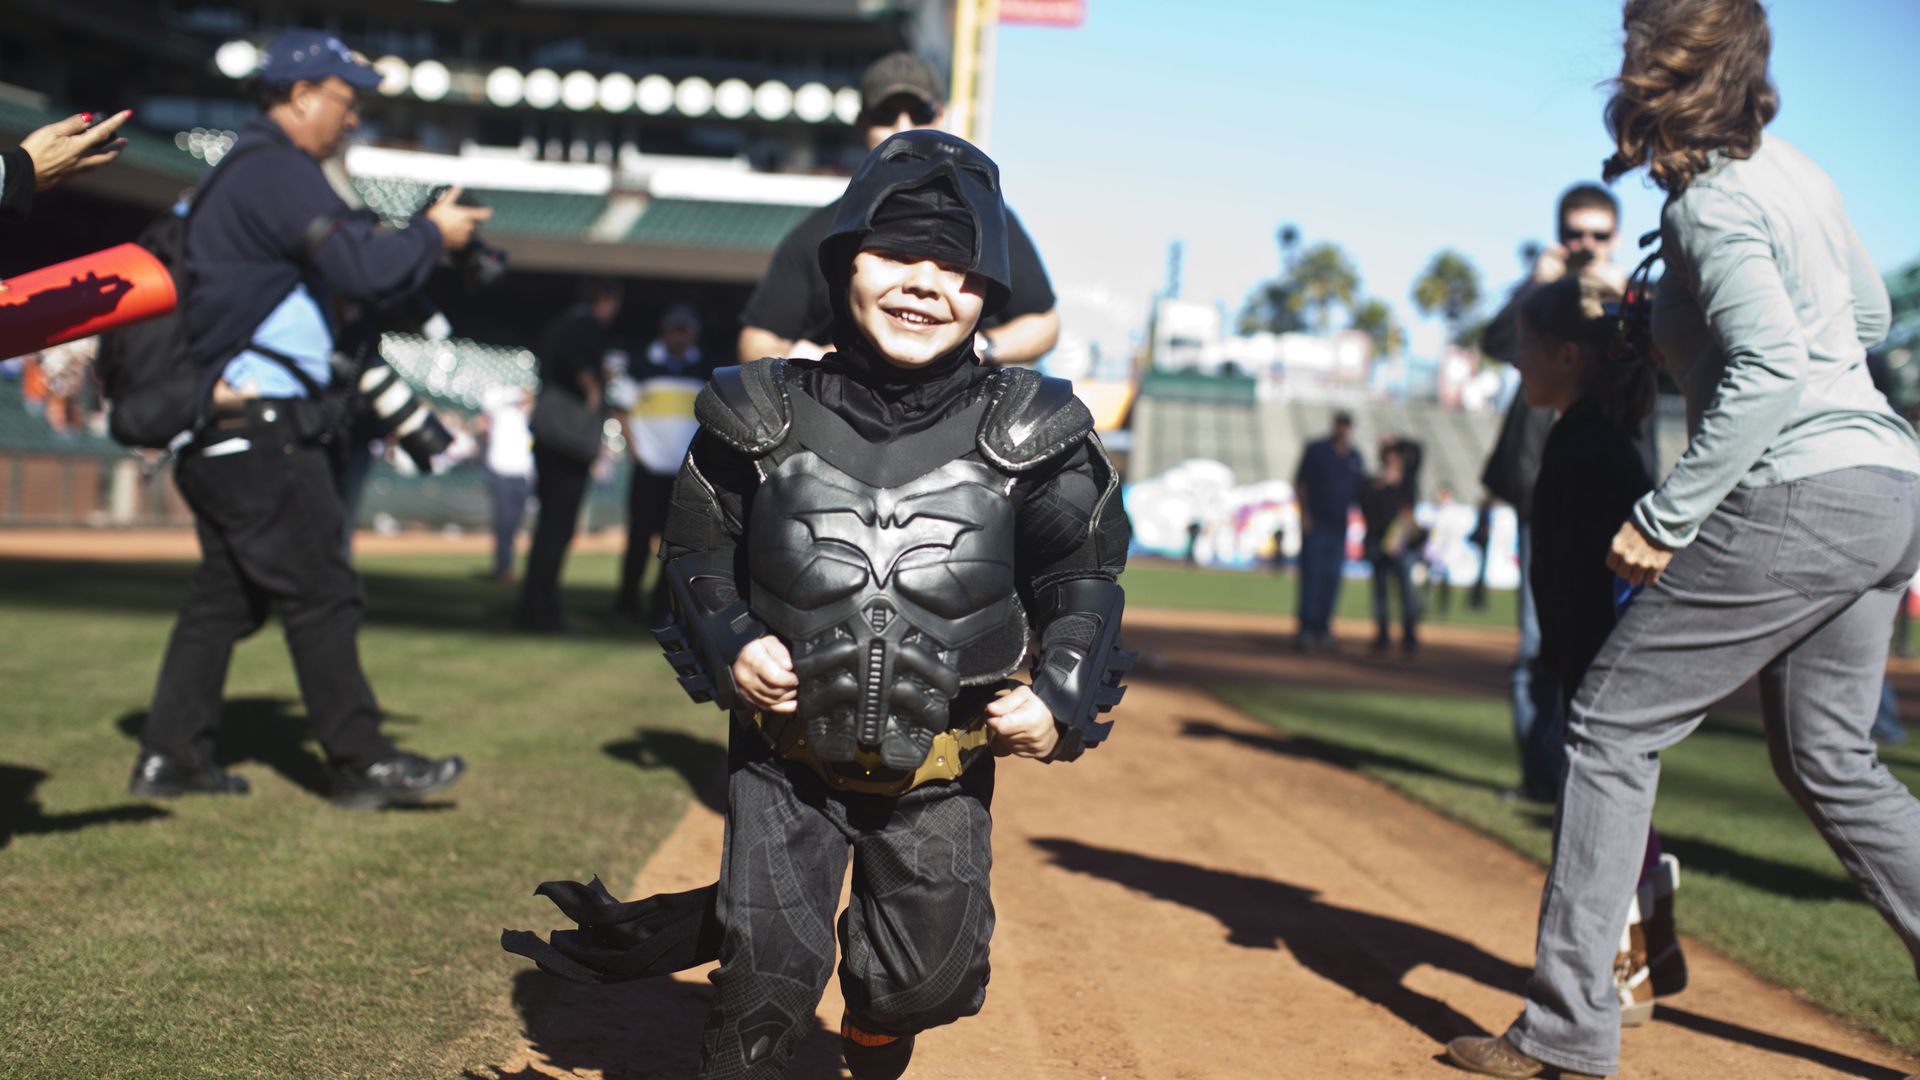 Photo of a young boy dressed as Batkid smiling as he runs